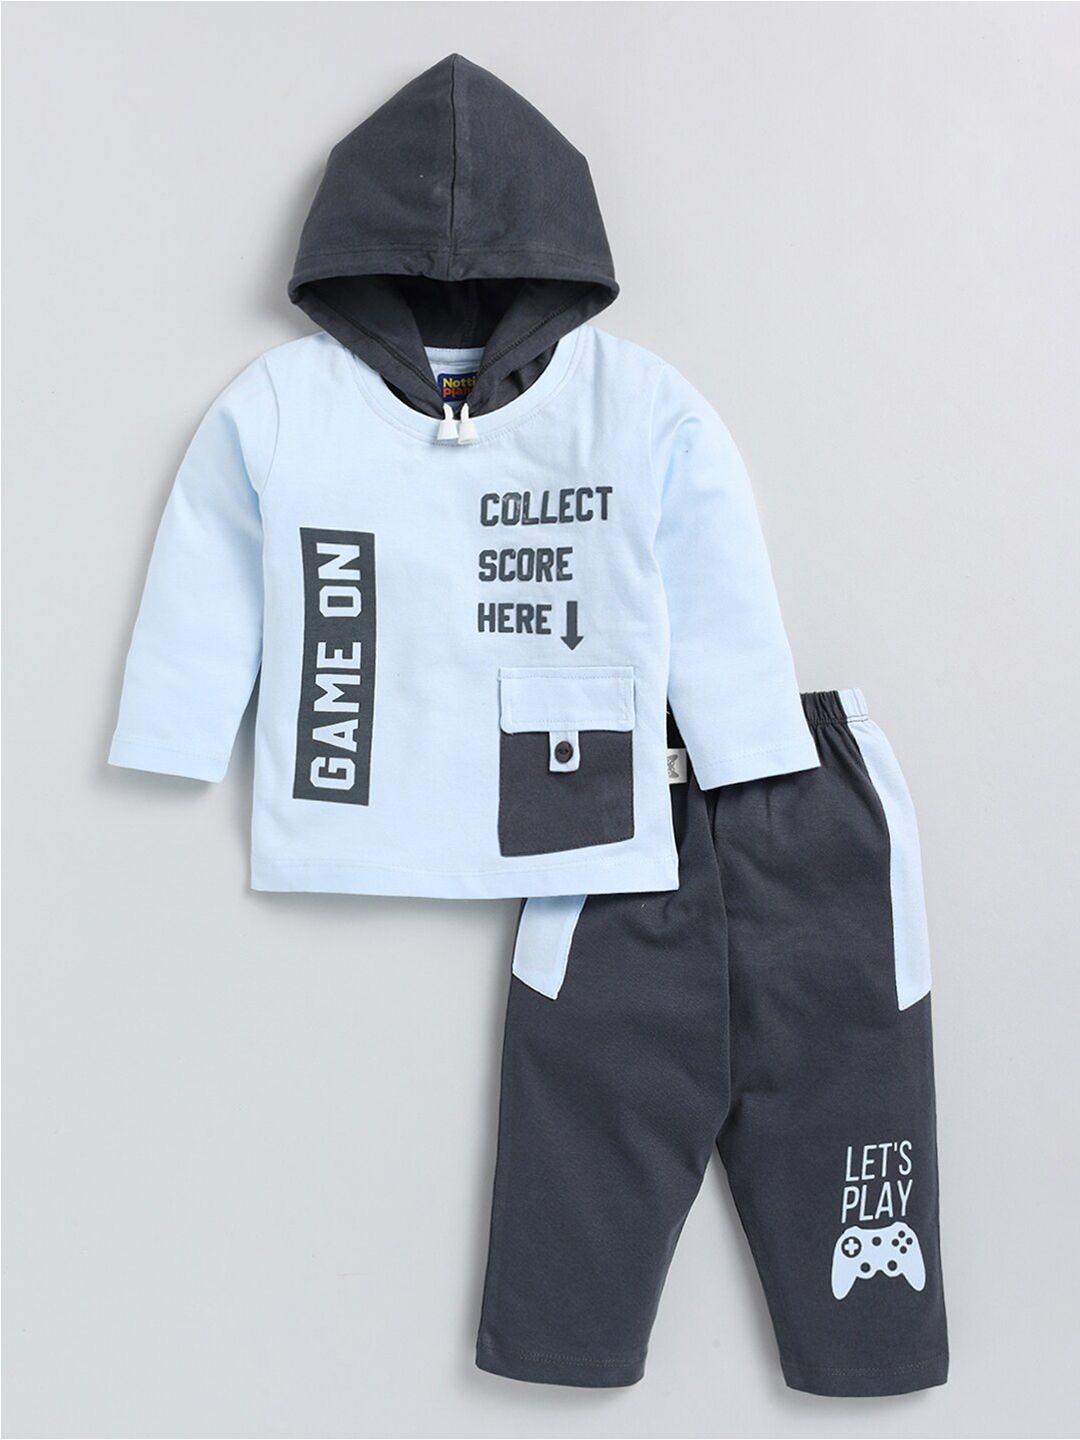 nottie-planet-boys-typography-printed-hooded-neck-pure-cotton-clothing-set